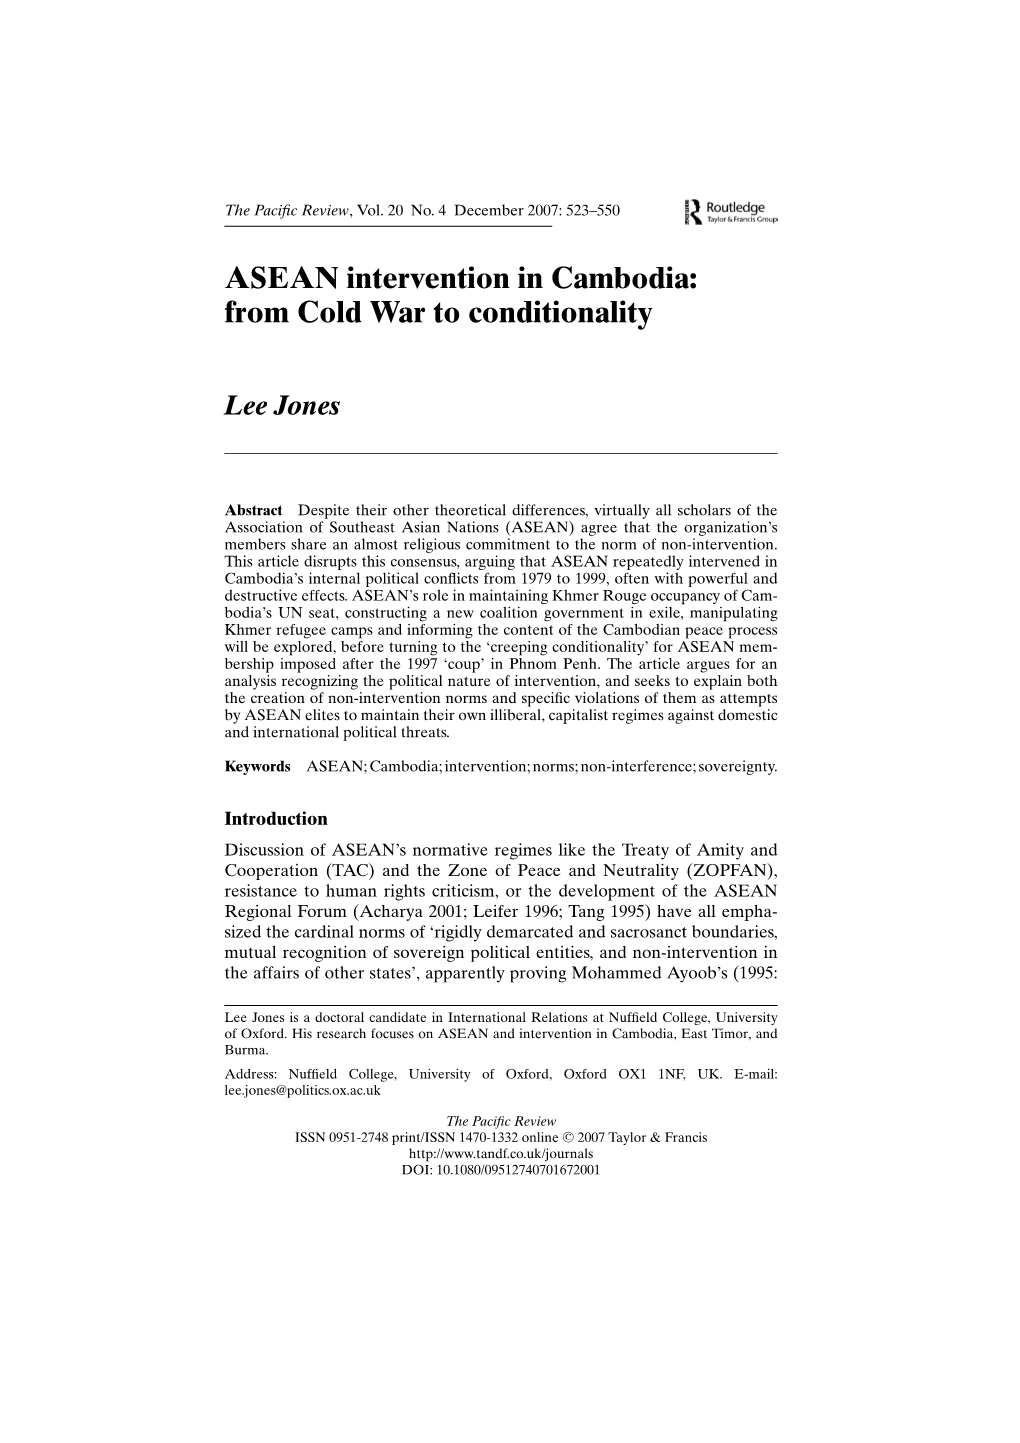 ASEAN Intervention in Cambodia: from Cold War to Conditionality